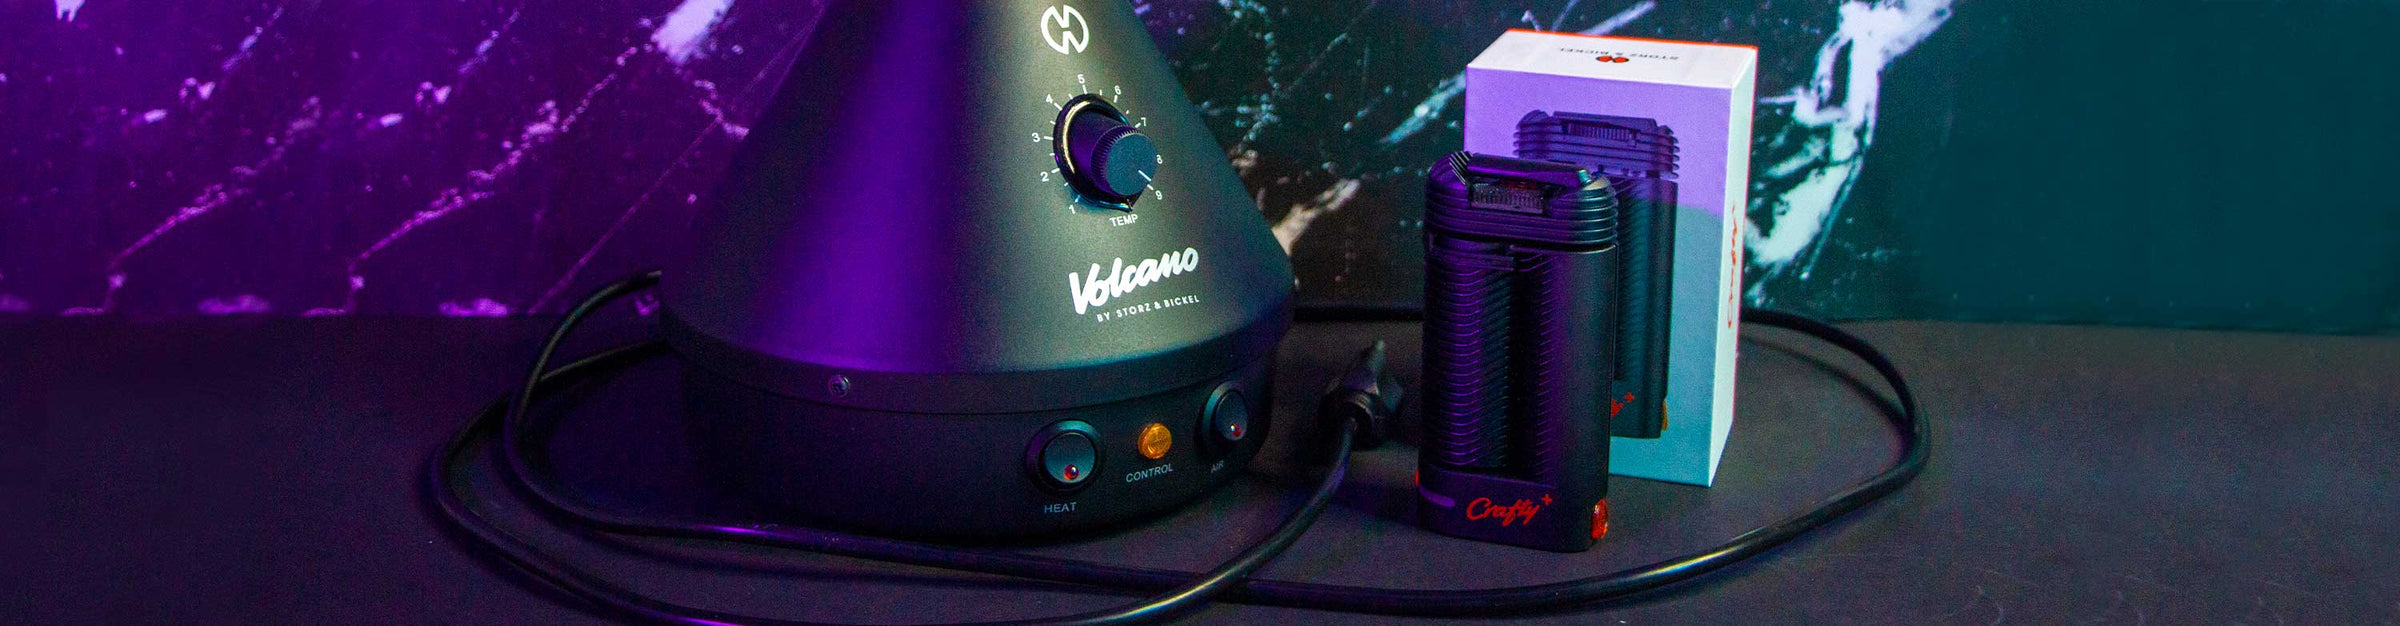 Wholesale Storz & Bickel vaporizers Crafty Plus and Volcano resting on a dark table with a lightning background in purple and teal lighting.